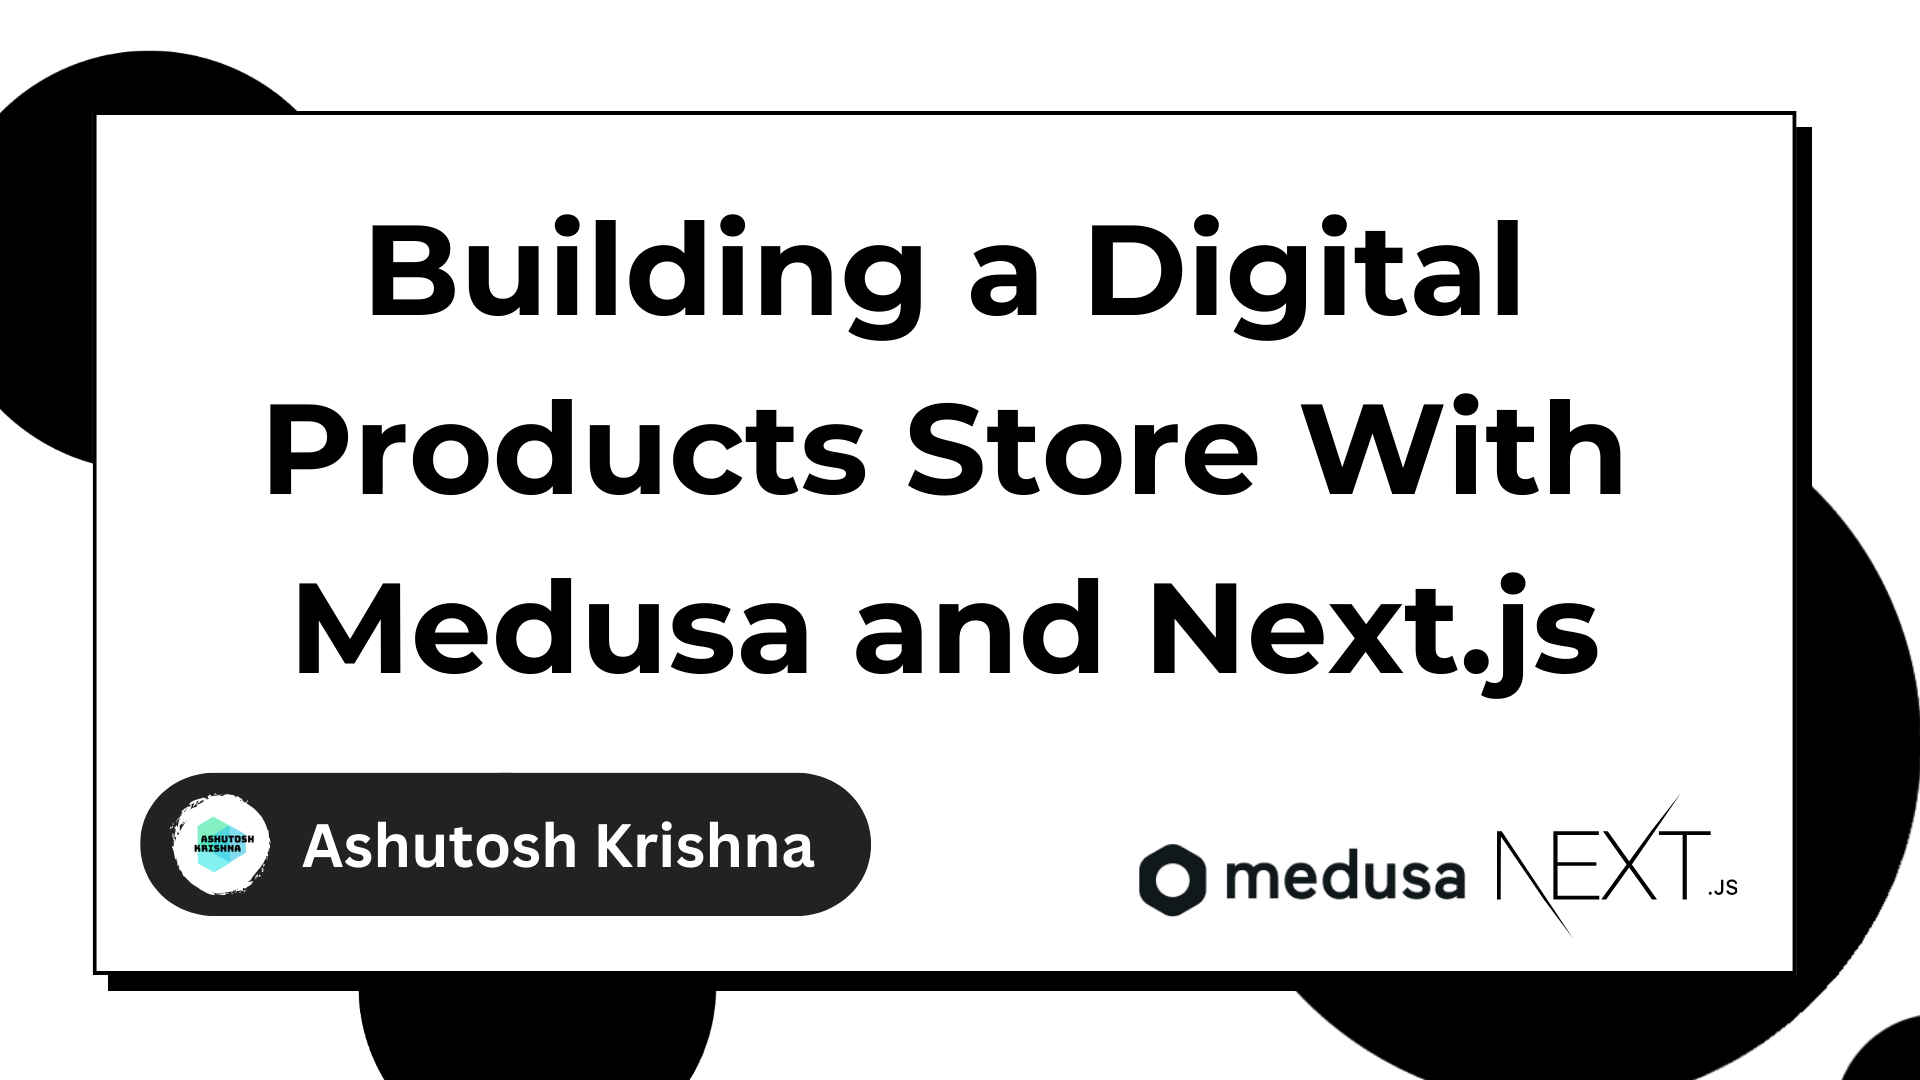 How to Build a Digital Products Store with Medusa and Next.js